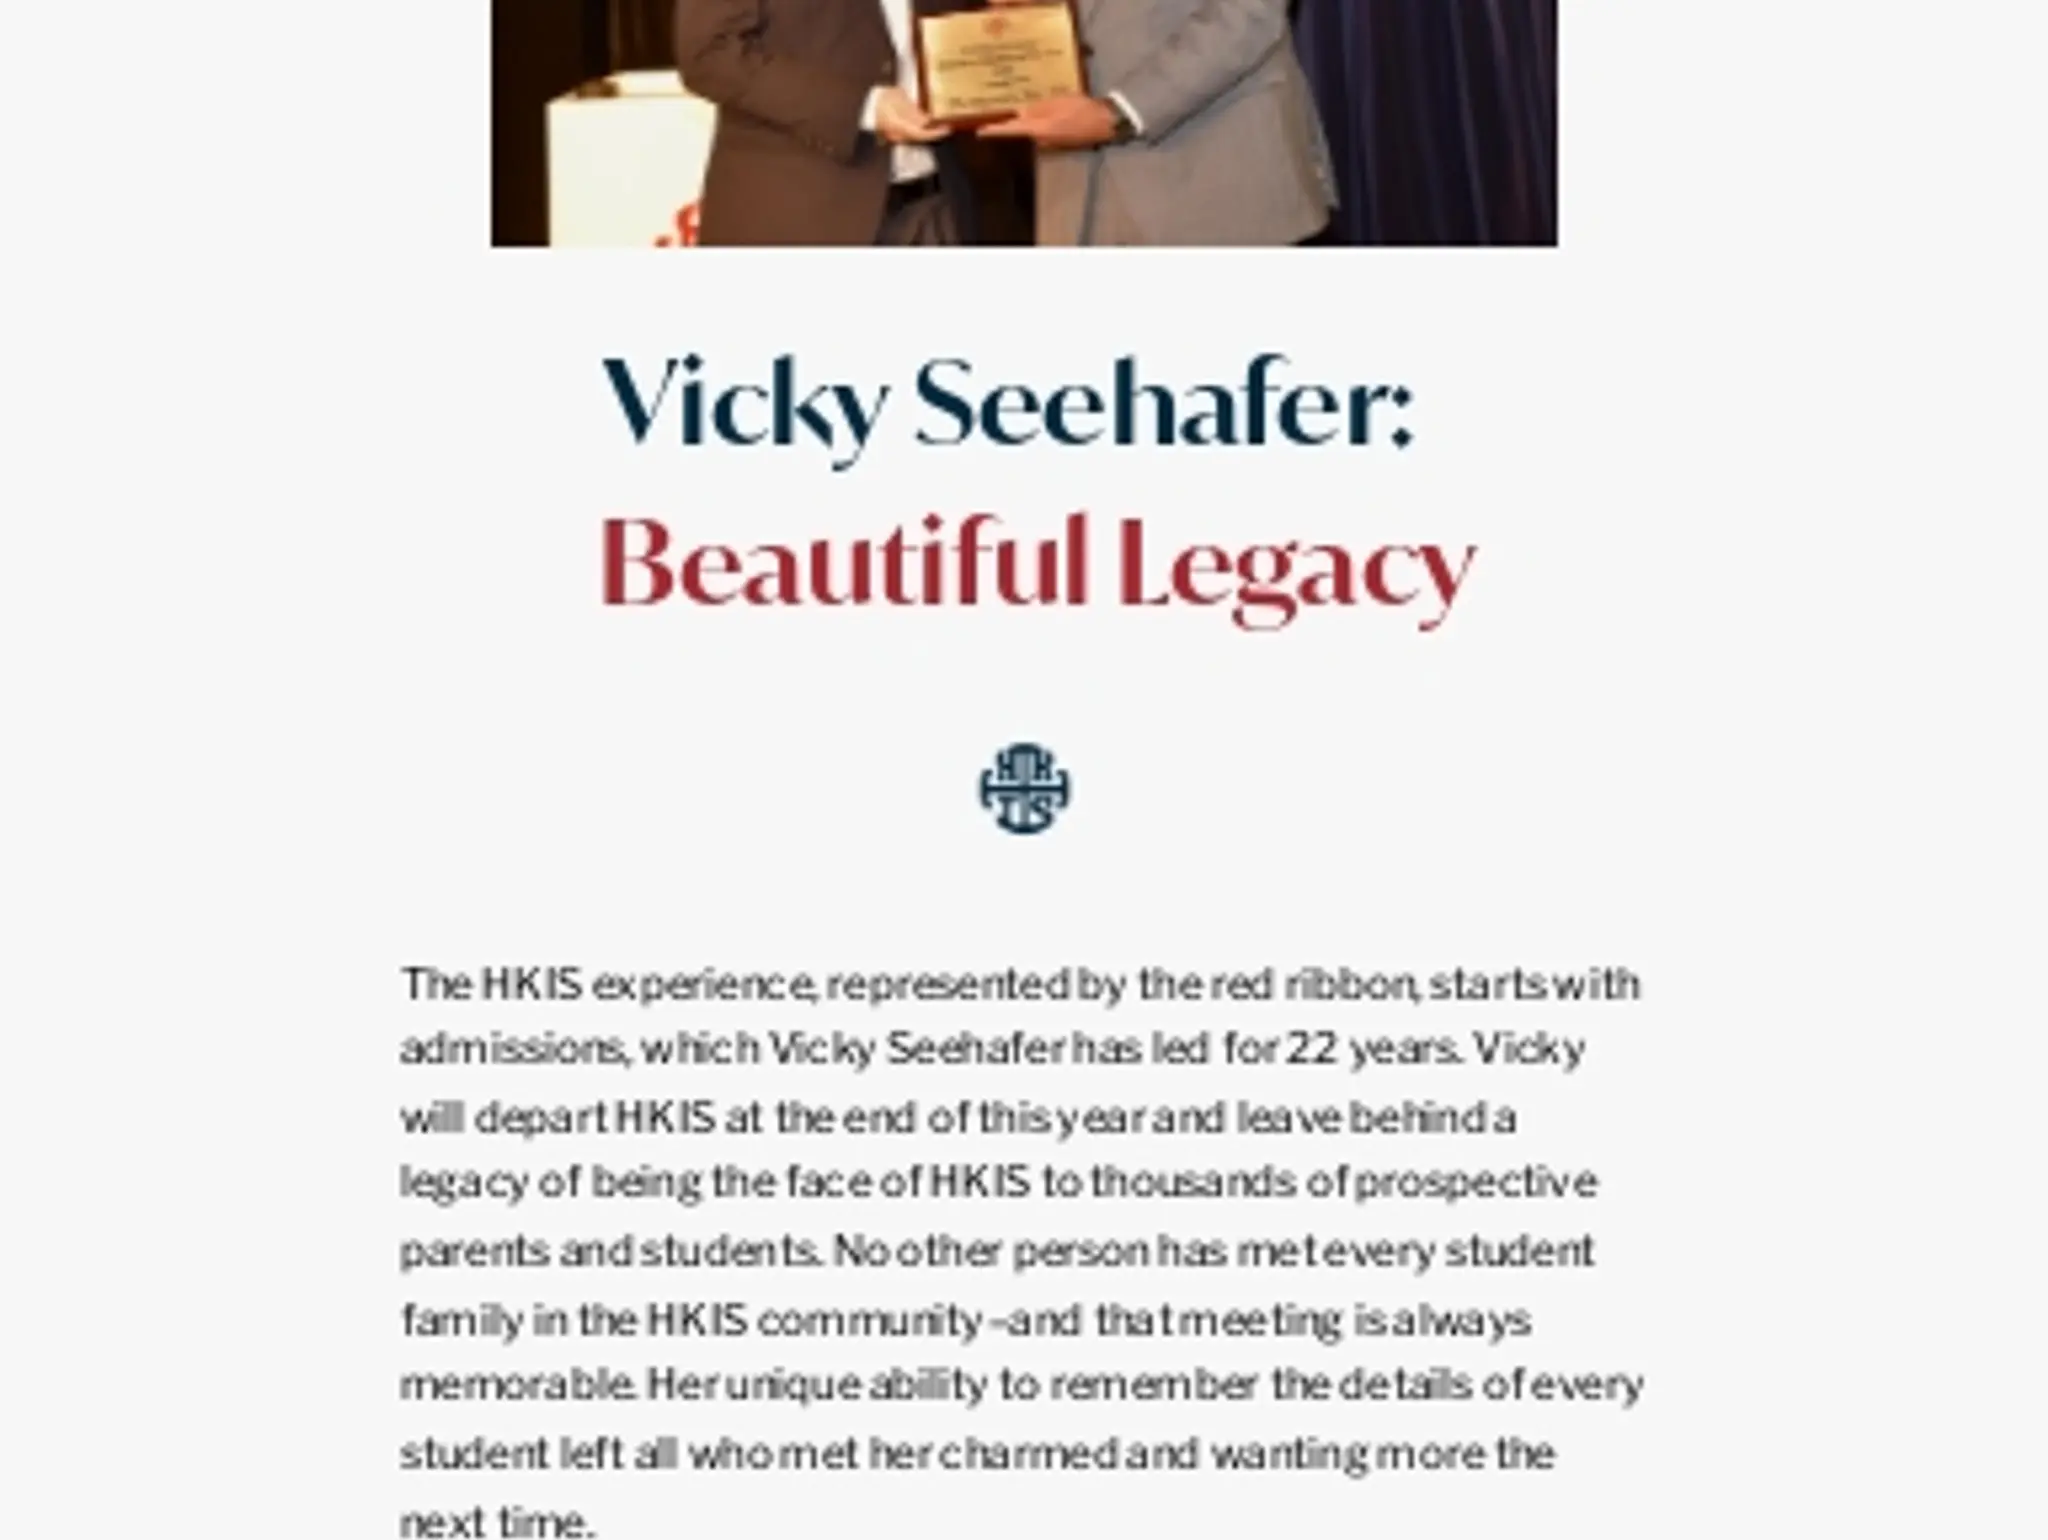 Vicky Seehafer: A Beautiful Legacy